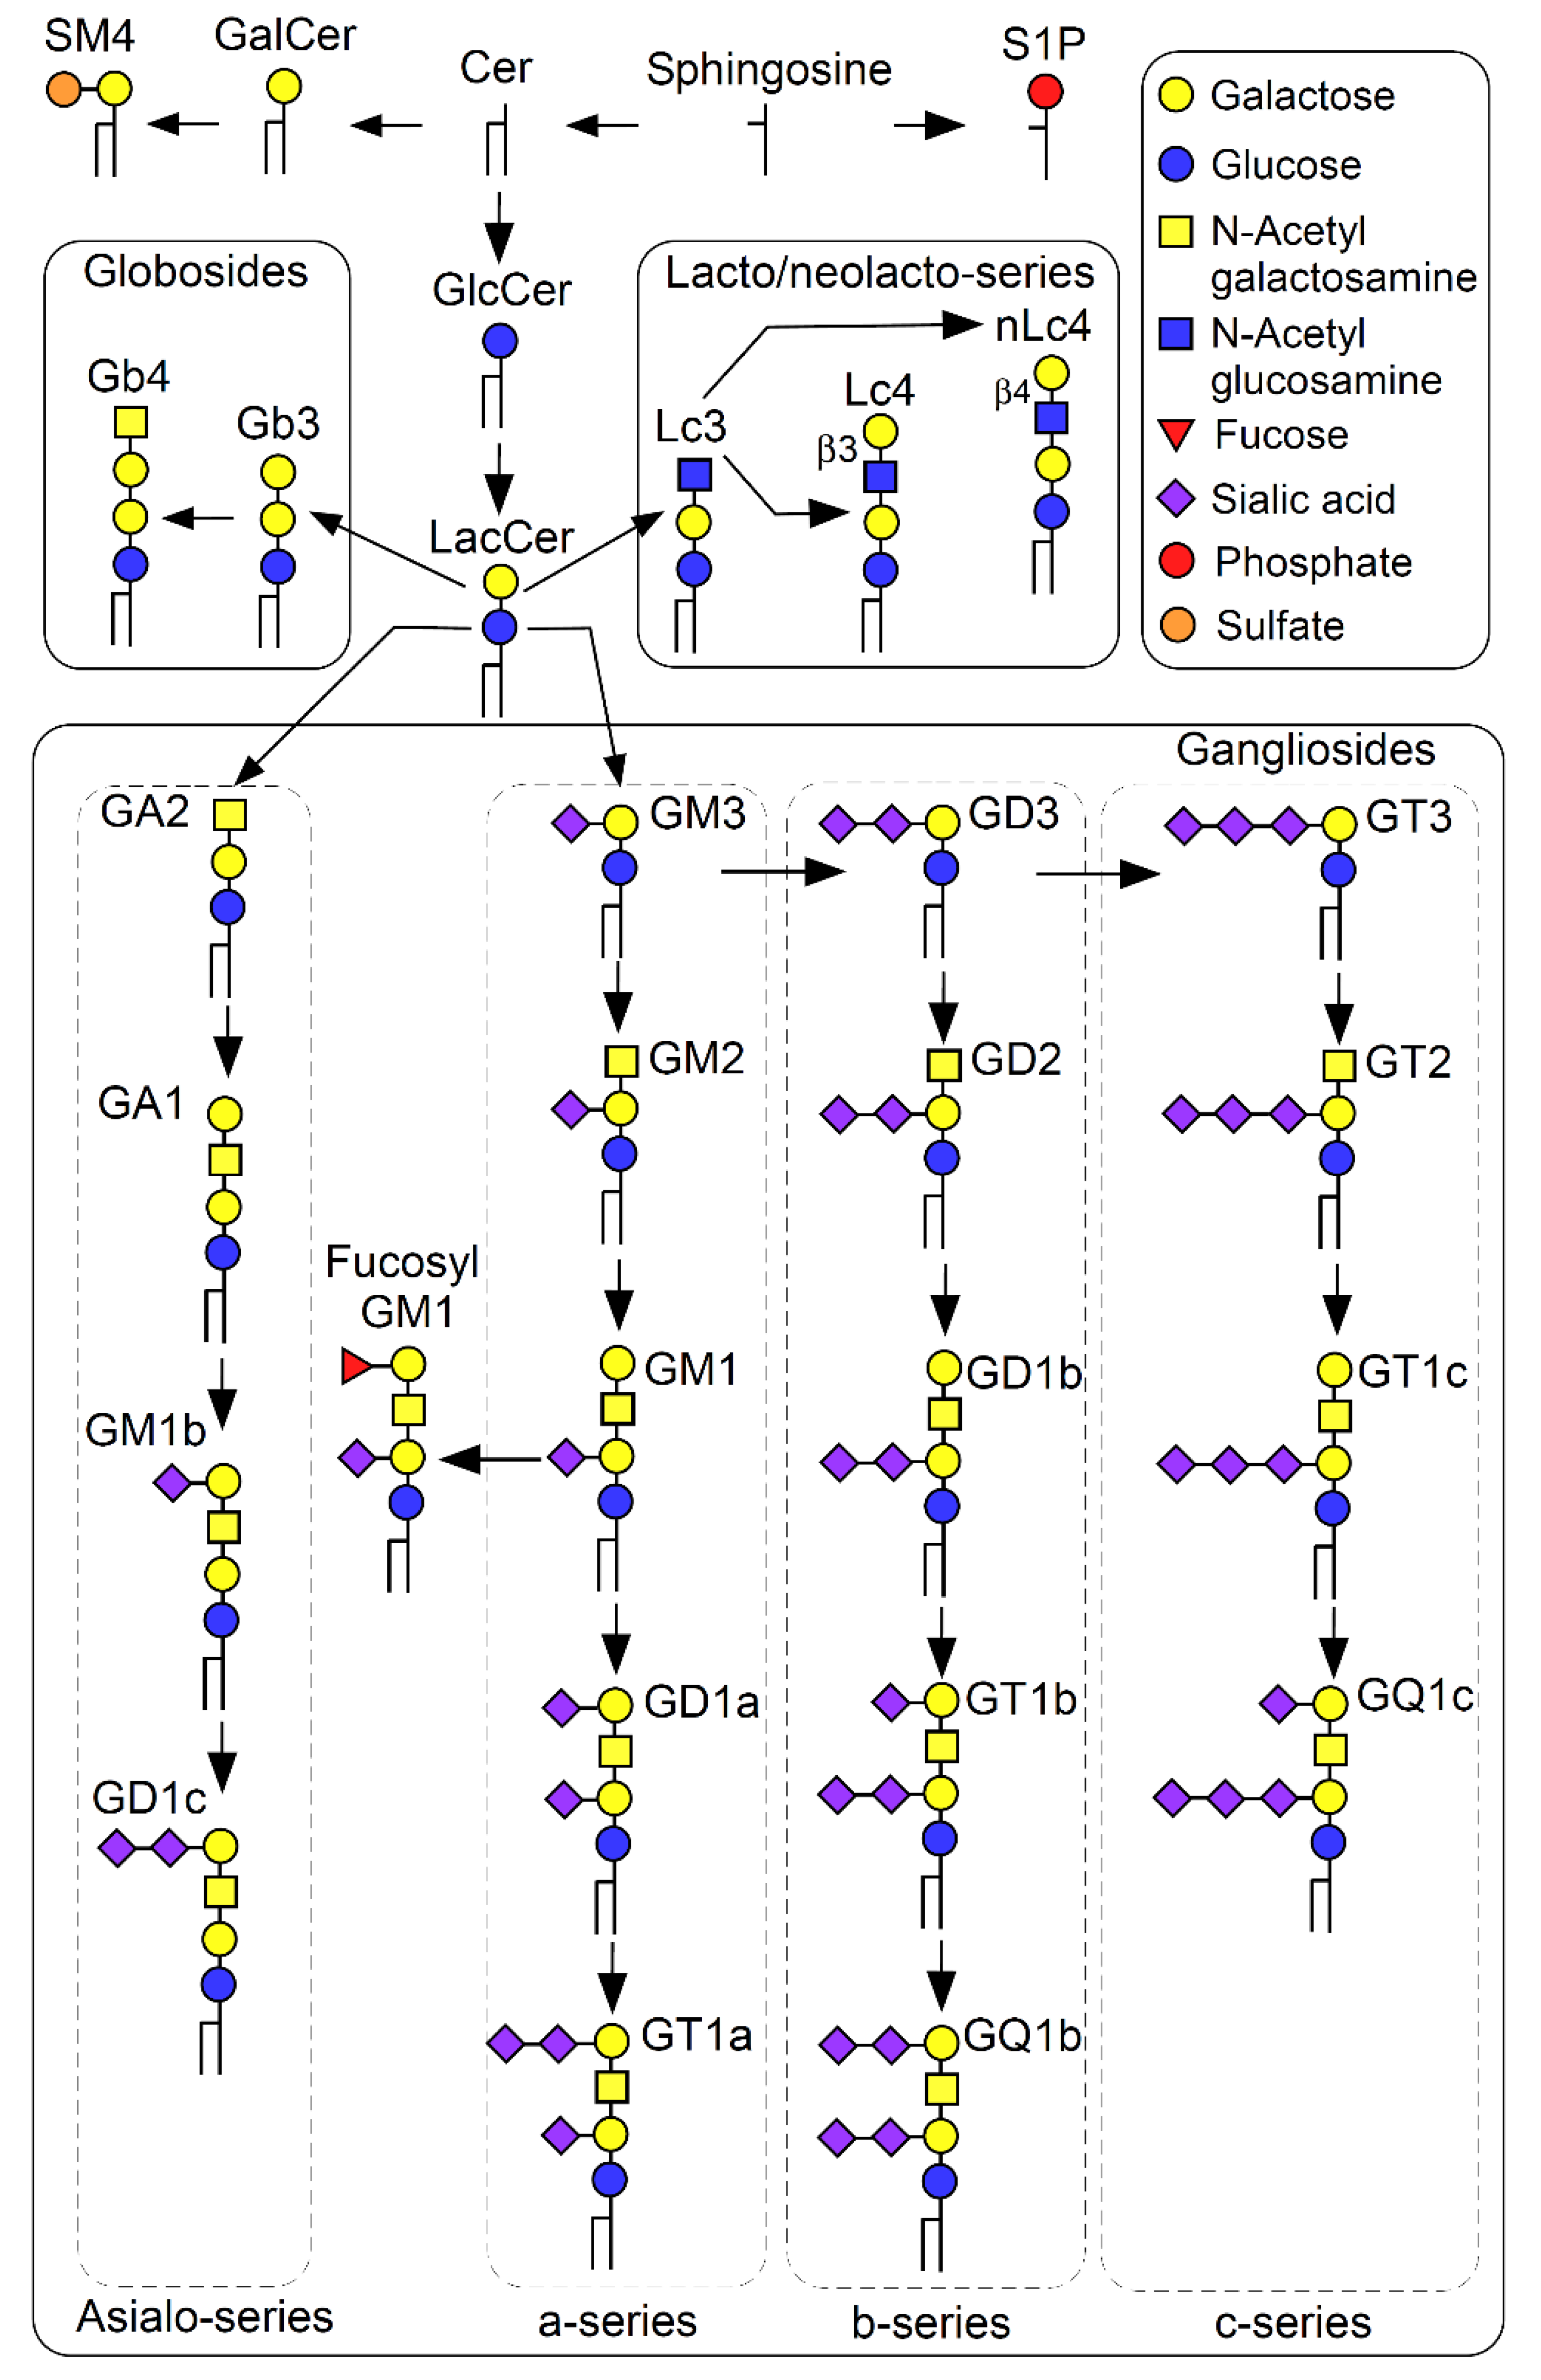 IJMS | Free Full-Text | Multiplicity of Glycosphingolipid-Enriched Microdomain-Driven Immune Signaling |